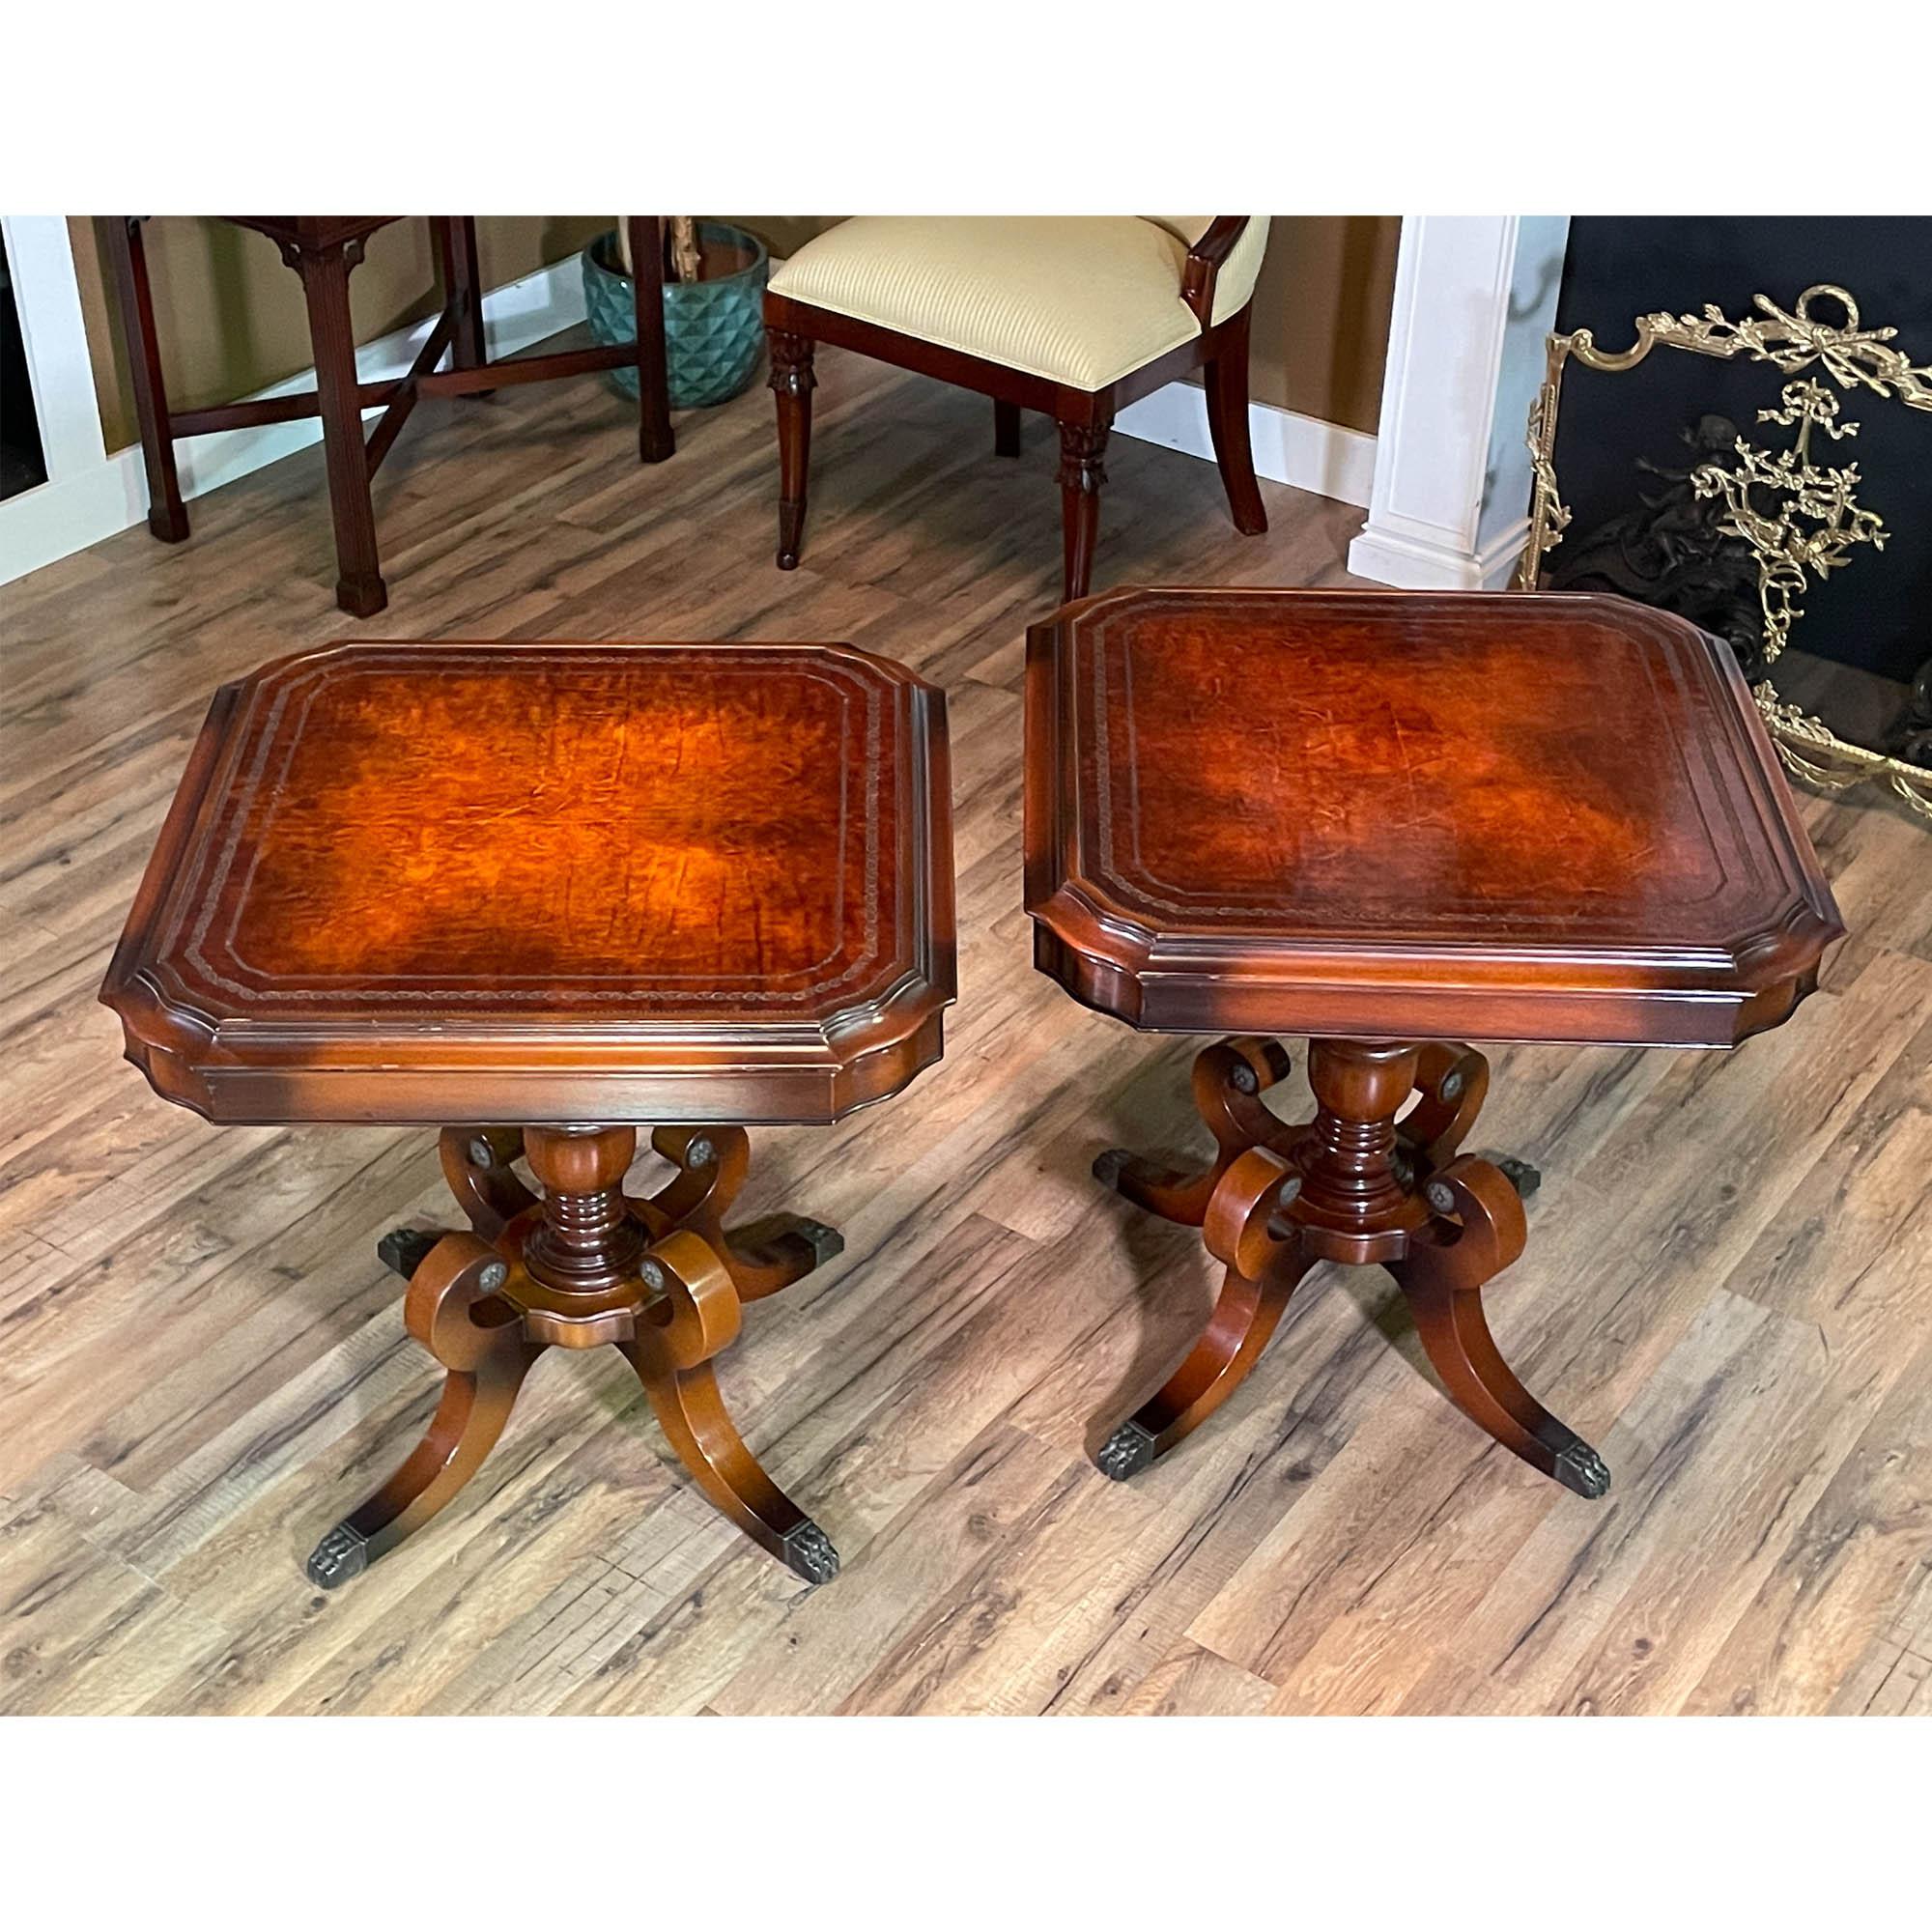 A PAIR Leather Top Tables featuring beautifully detailed leather tops and stylish bases. Very nice quality tables created in the middle of the 20th Century with a stylish, multi toned finish and very colorful leather. These tables are eye very